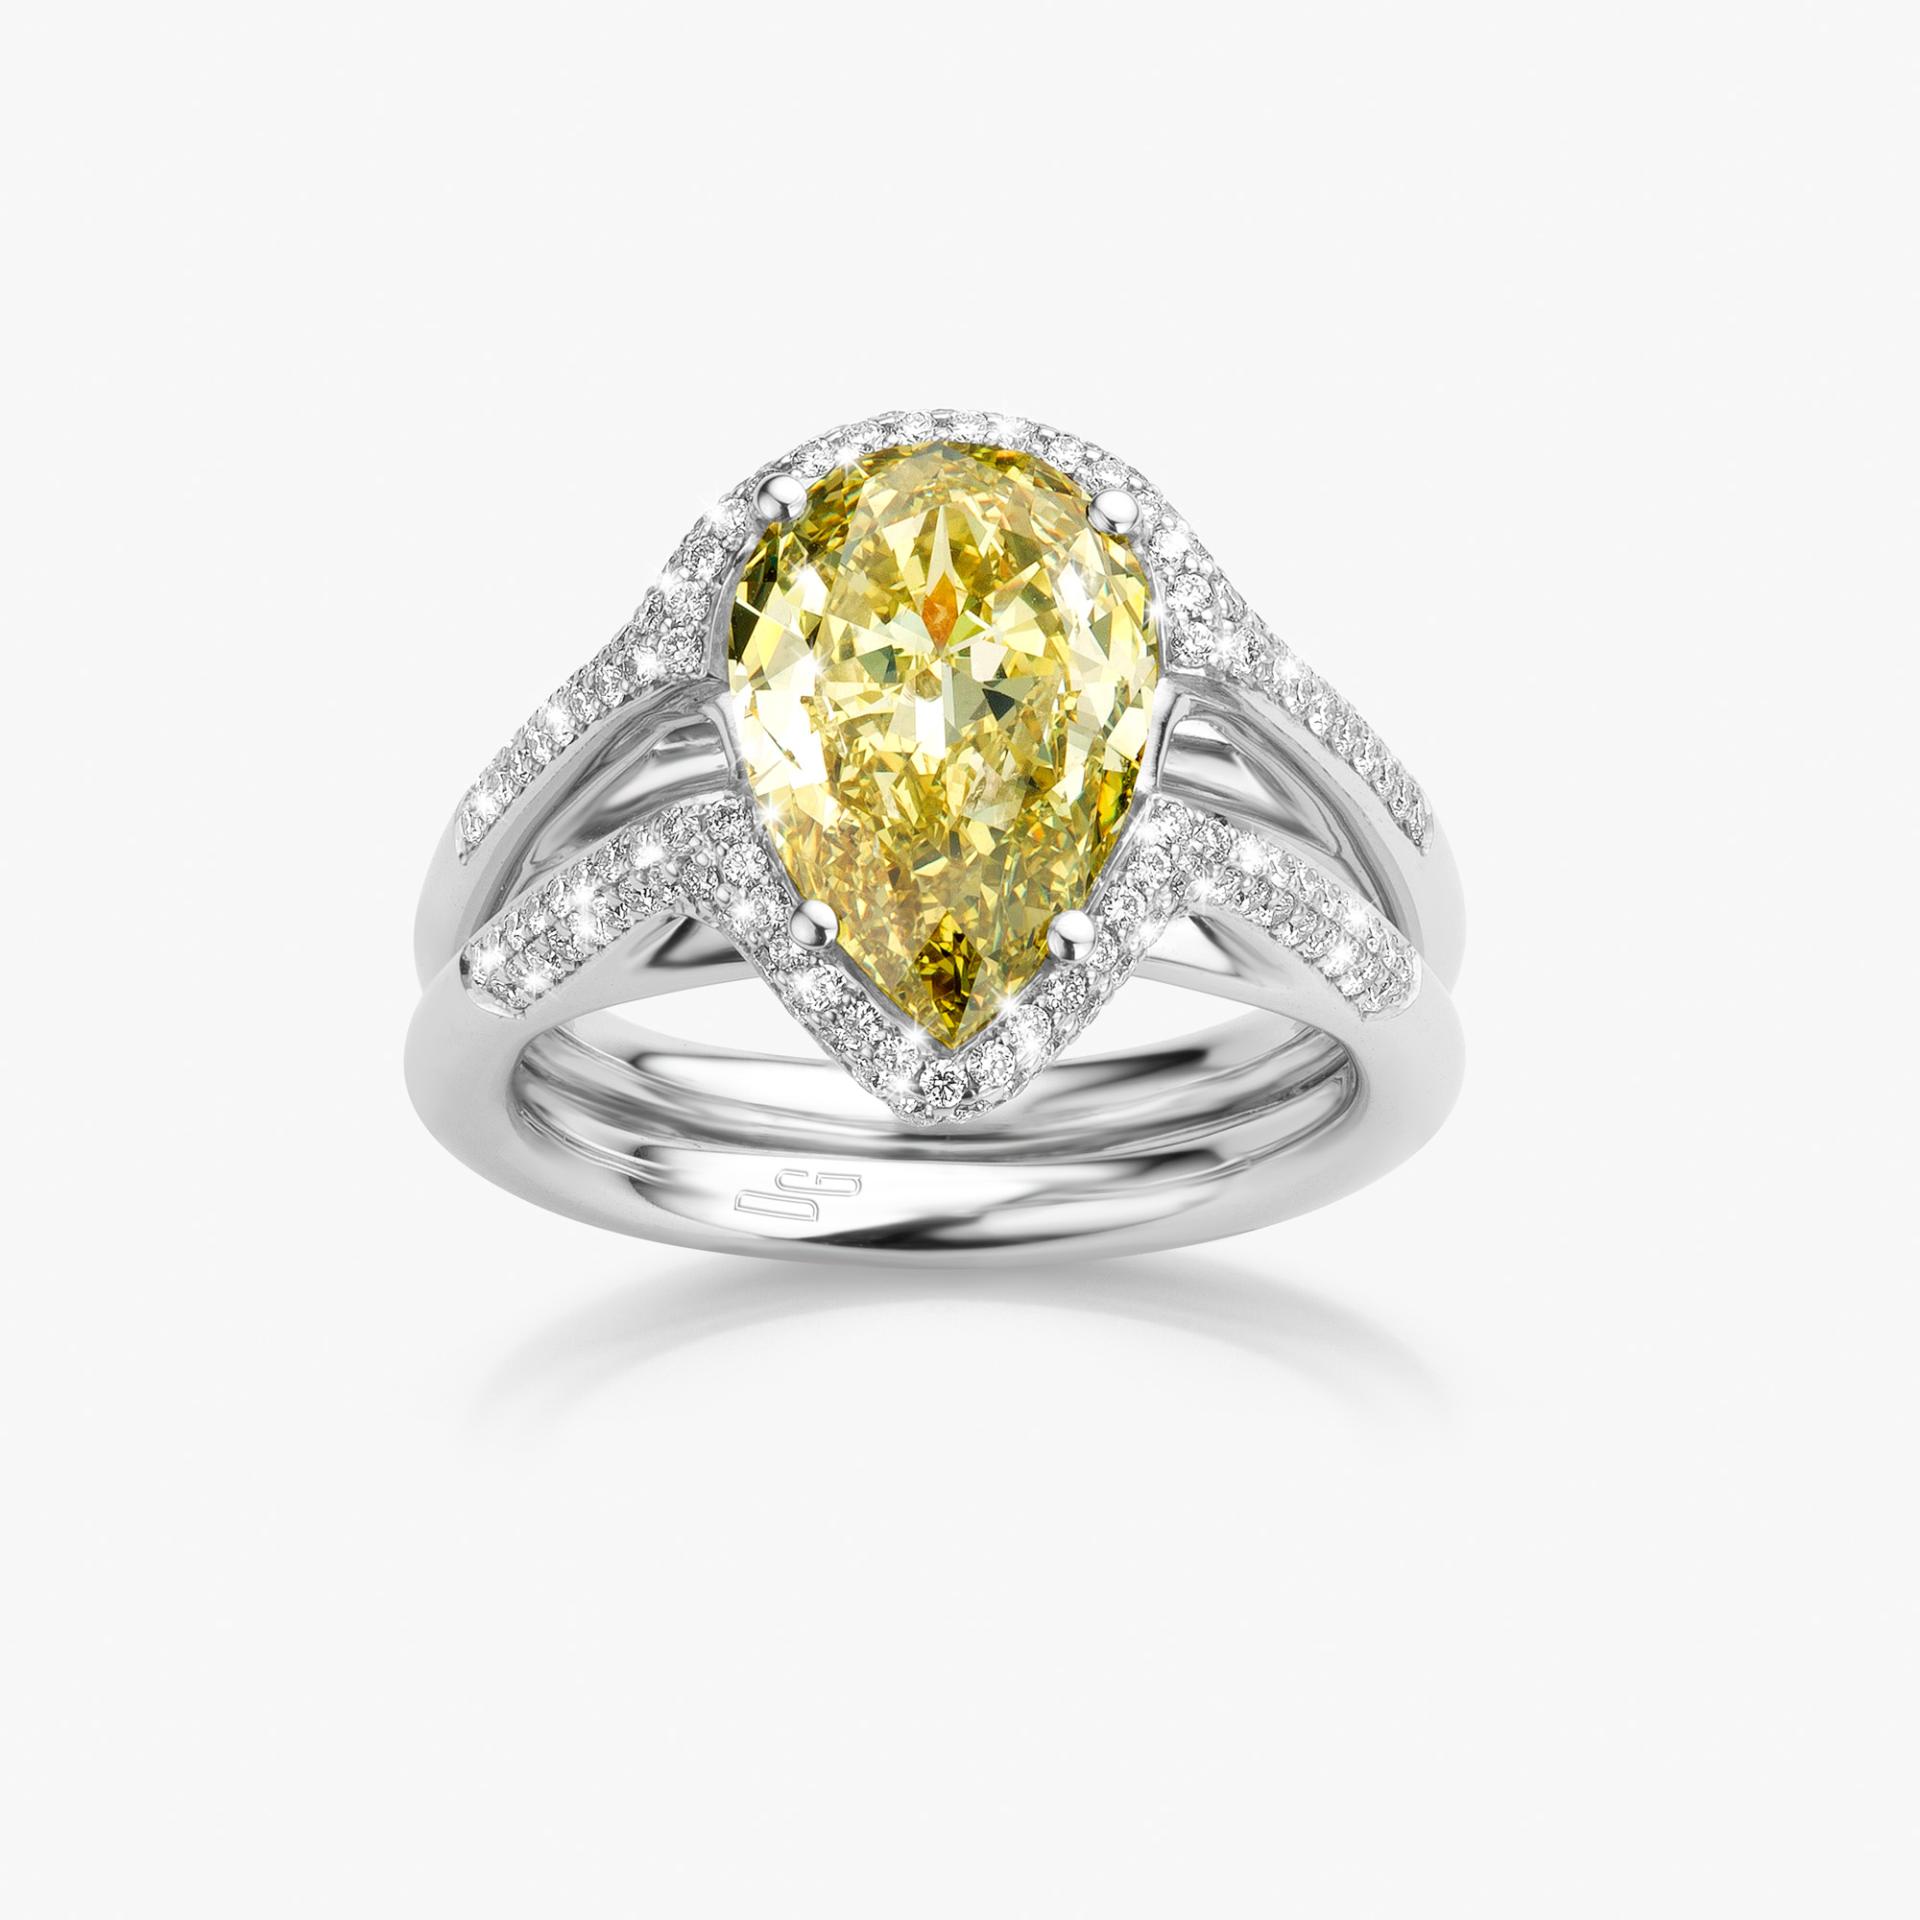 White gold ring set with pear shaped diamond Fancy Yellow and brilliants made by Maison De Greef